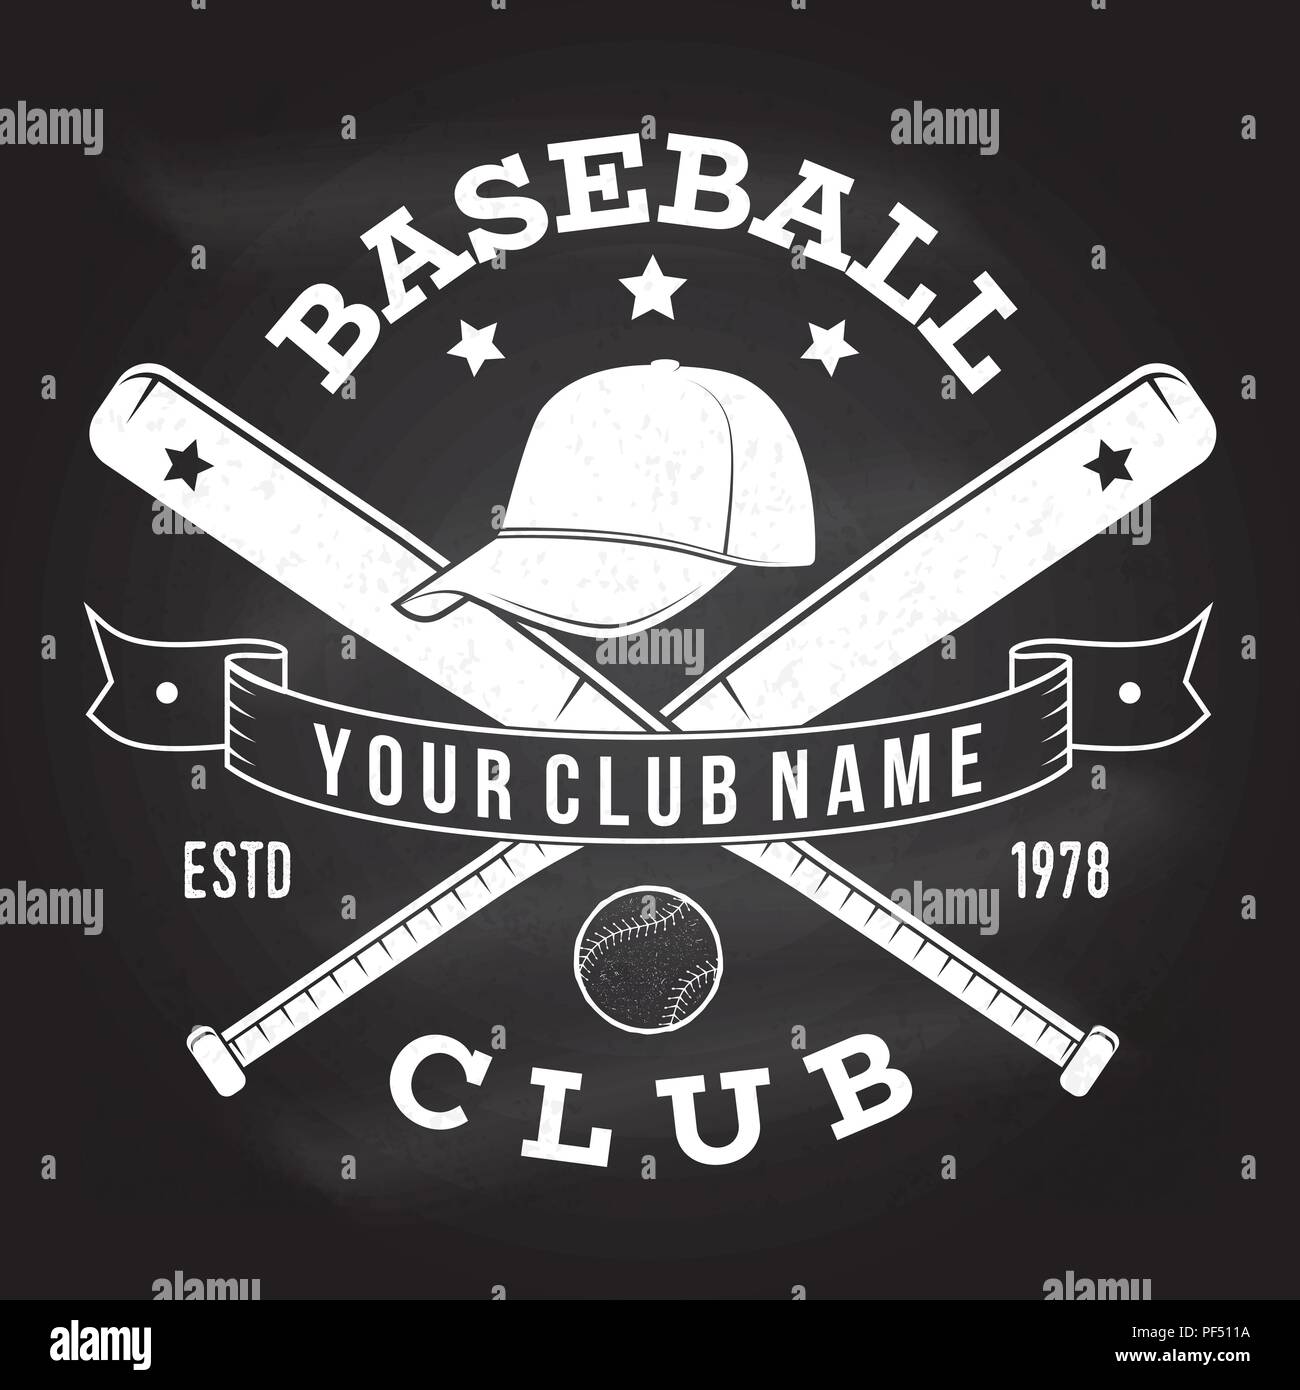 Baseball club badge on the chalkboard. Vector illustration. Concept for shirt or logo, print, stamp or tee. Vintage typography design with baseball bats, cap and ball for baseball silhouette. Stock Vector